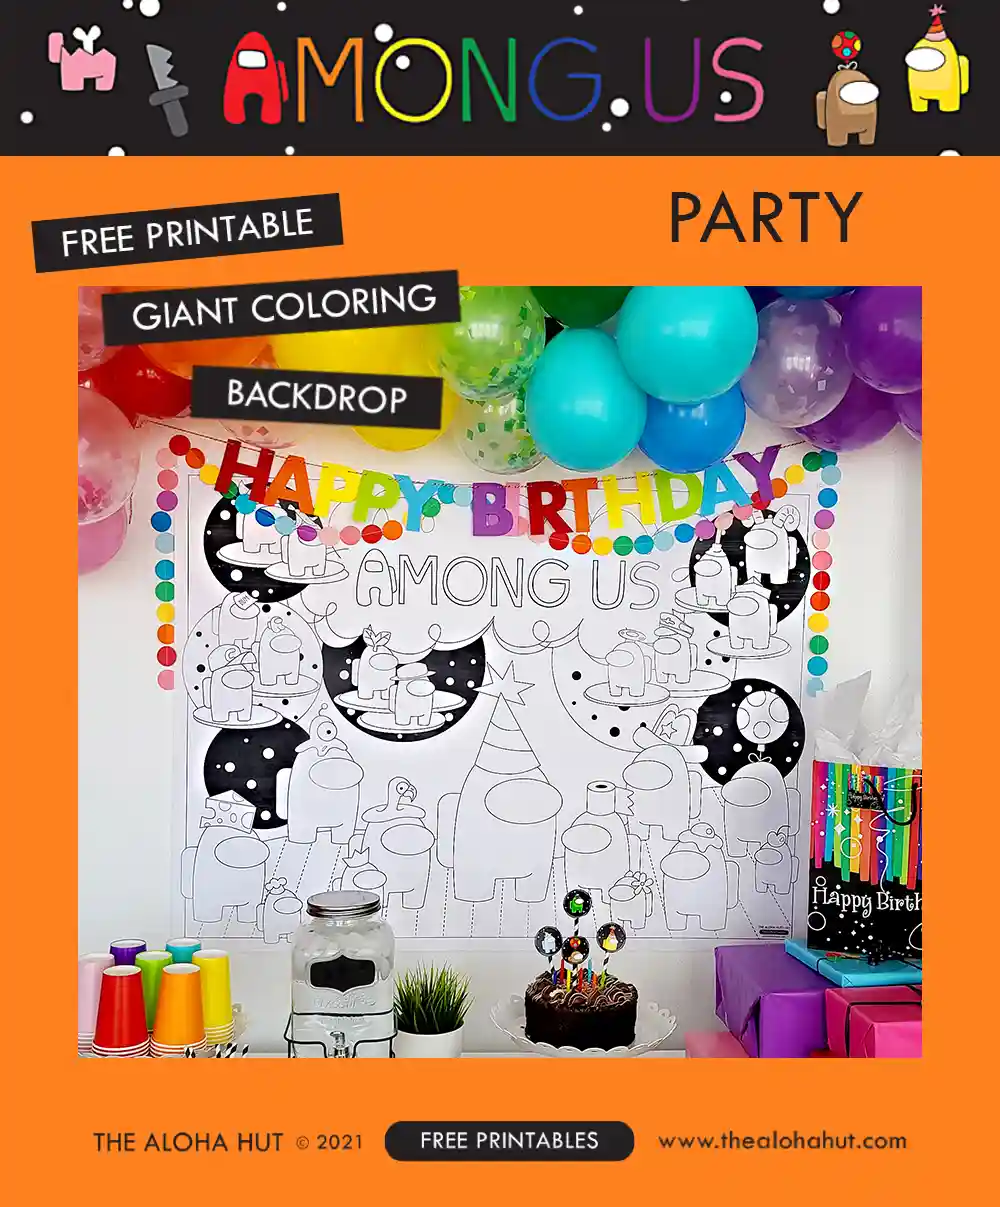 The best Among Us kids birthday party ideas, decorations, games, and activities including how to play Among Us in real life! Download the printable party pack for an easy Among Us party that is sure to be the best kids birthday celebration!! Includes photobooth props, Among Us cupcake toppers, banners, garlands, Among Us coloring pages, themed party games, and more!